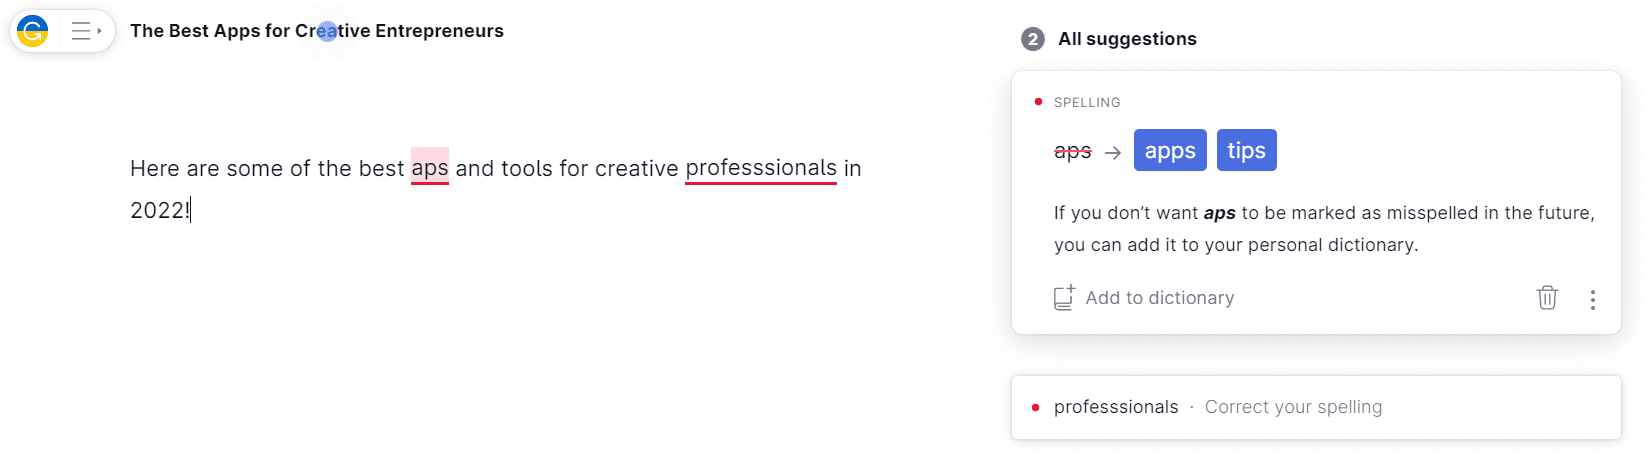 Grammarly App - Apps for Copywriters